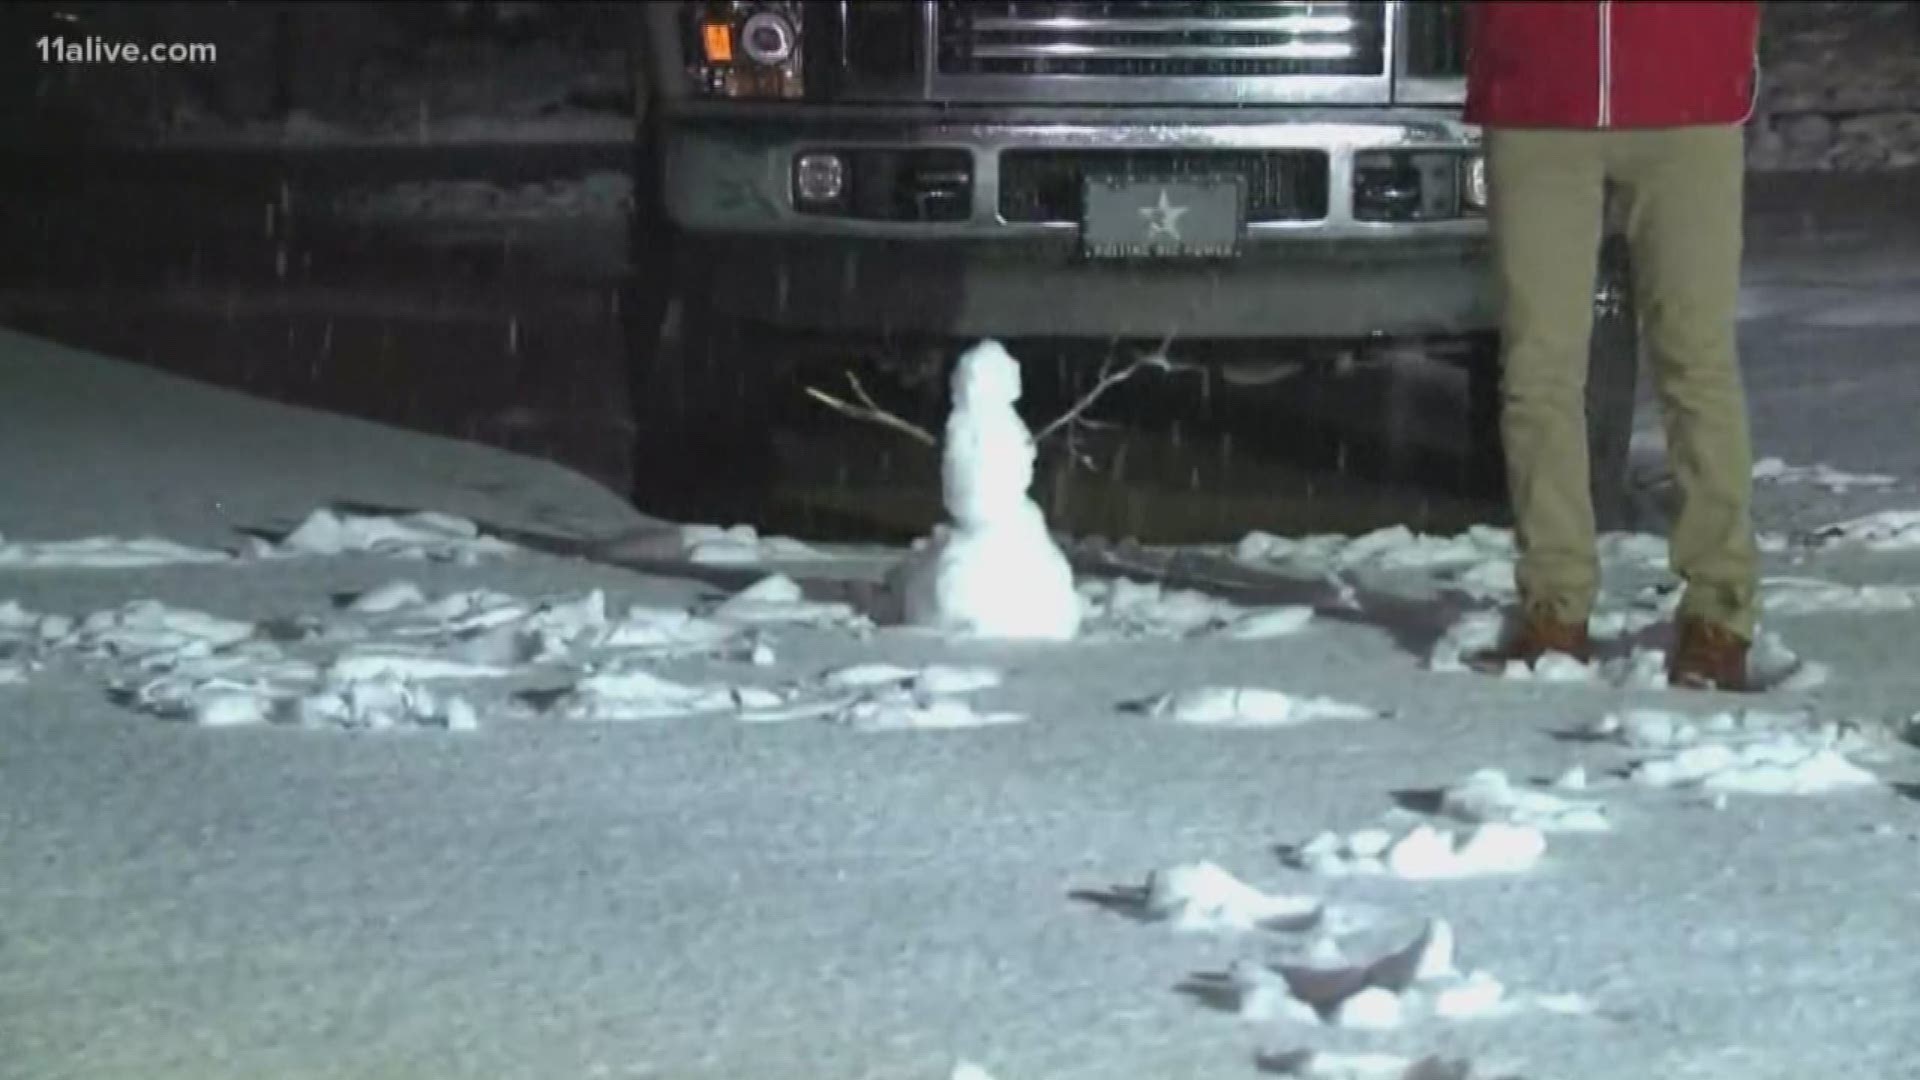 Snow in Clayton, Ga. is perfect for building snowmen | 11alive.com